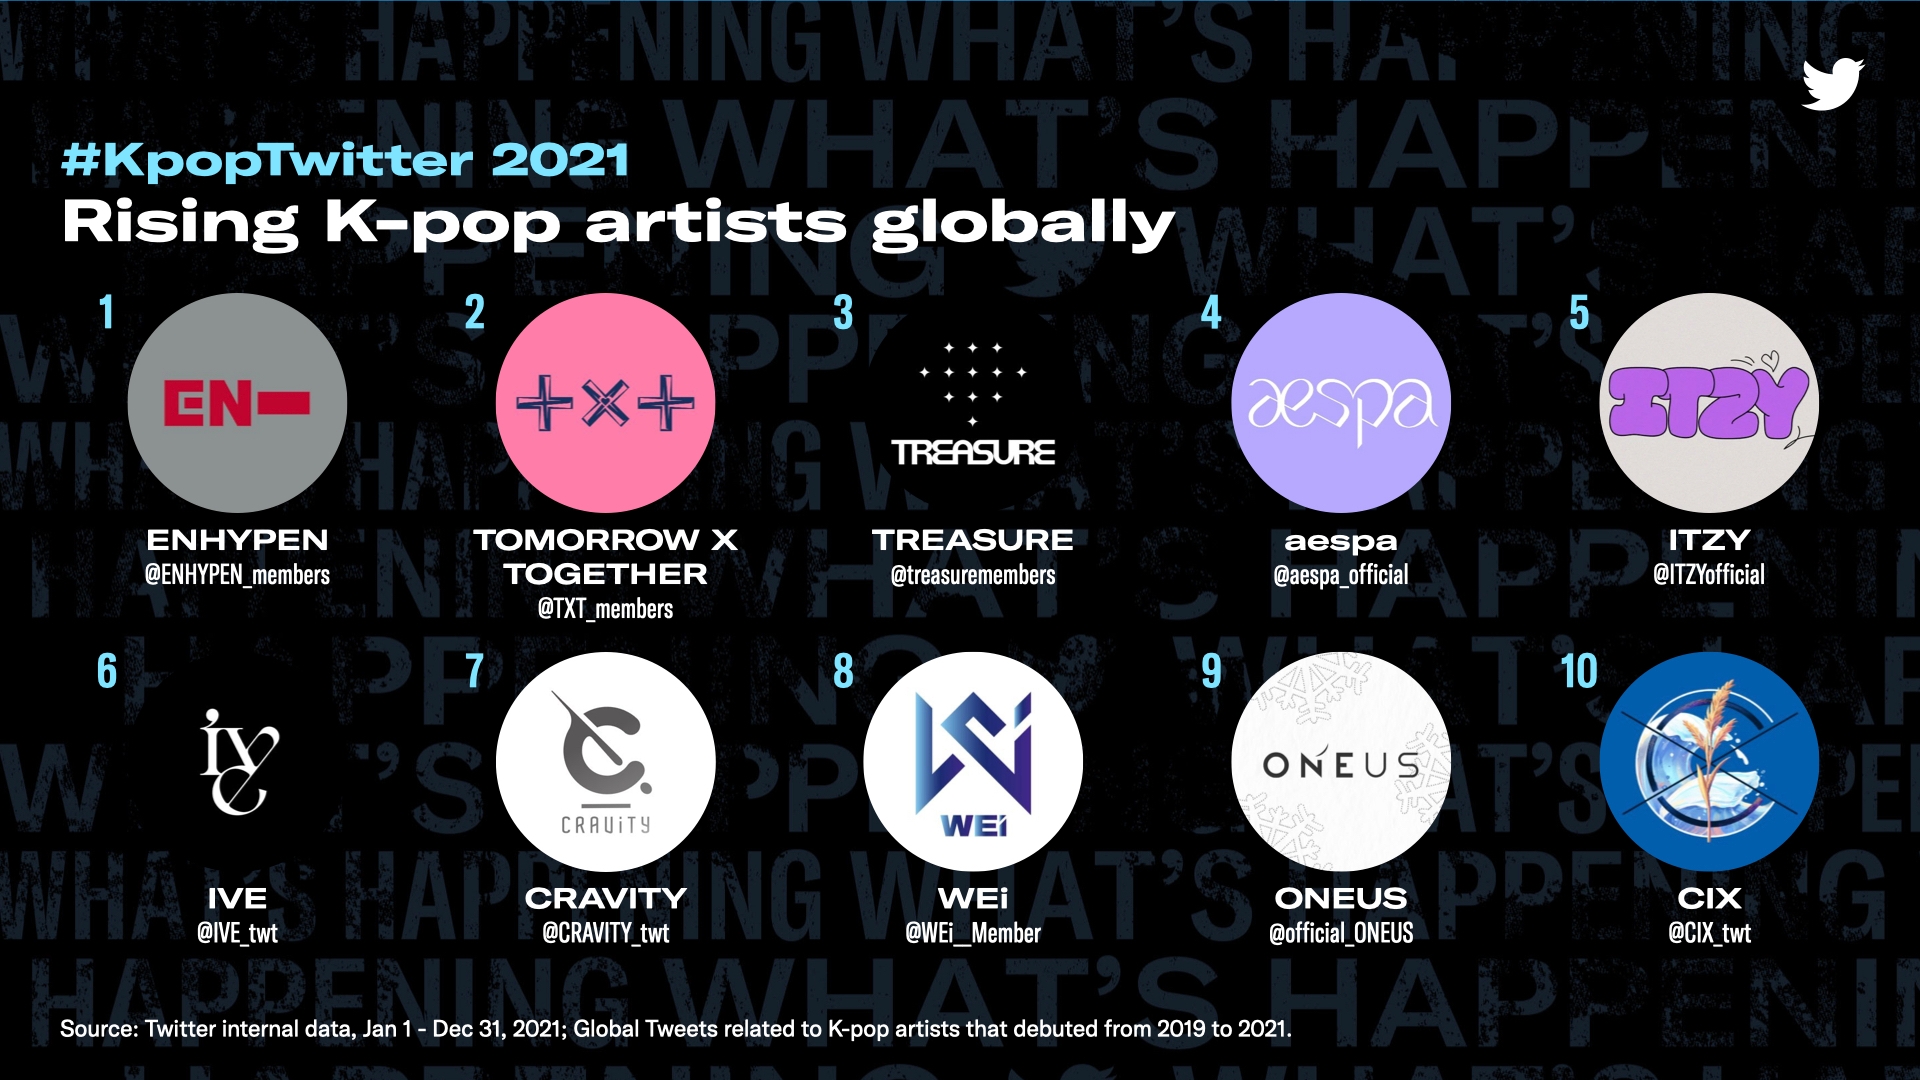 K-pop groups: The next great brand collaboration